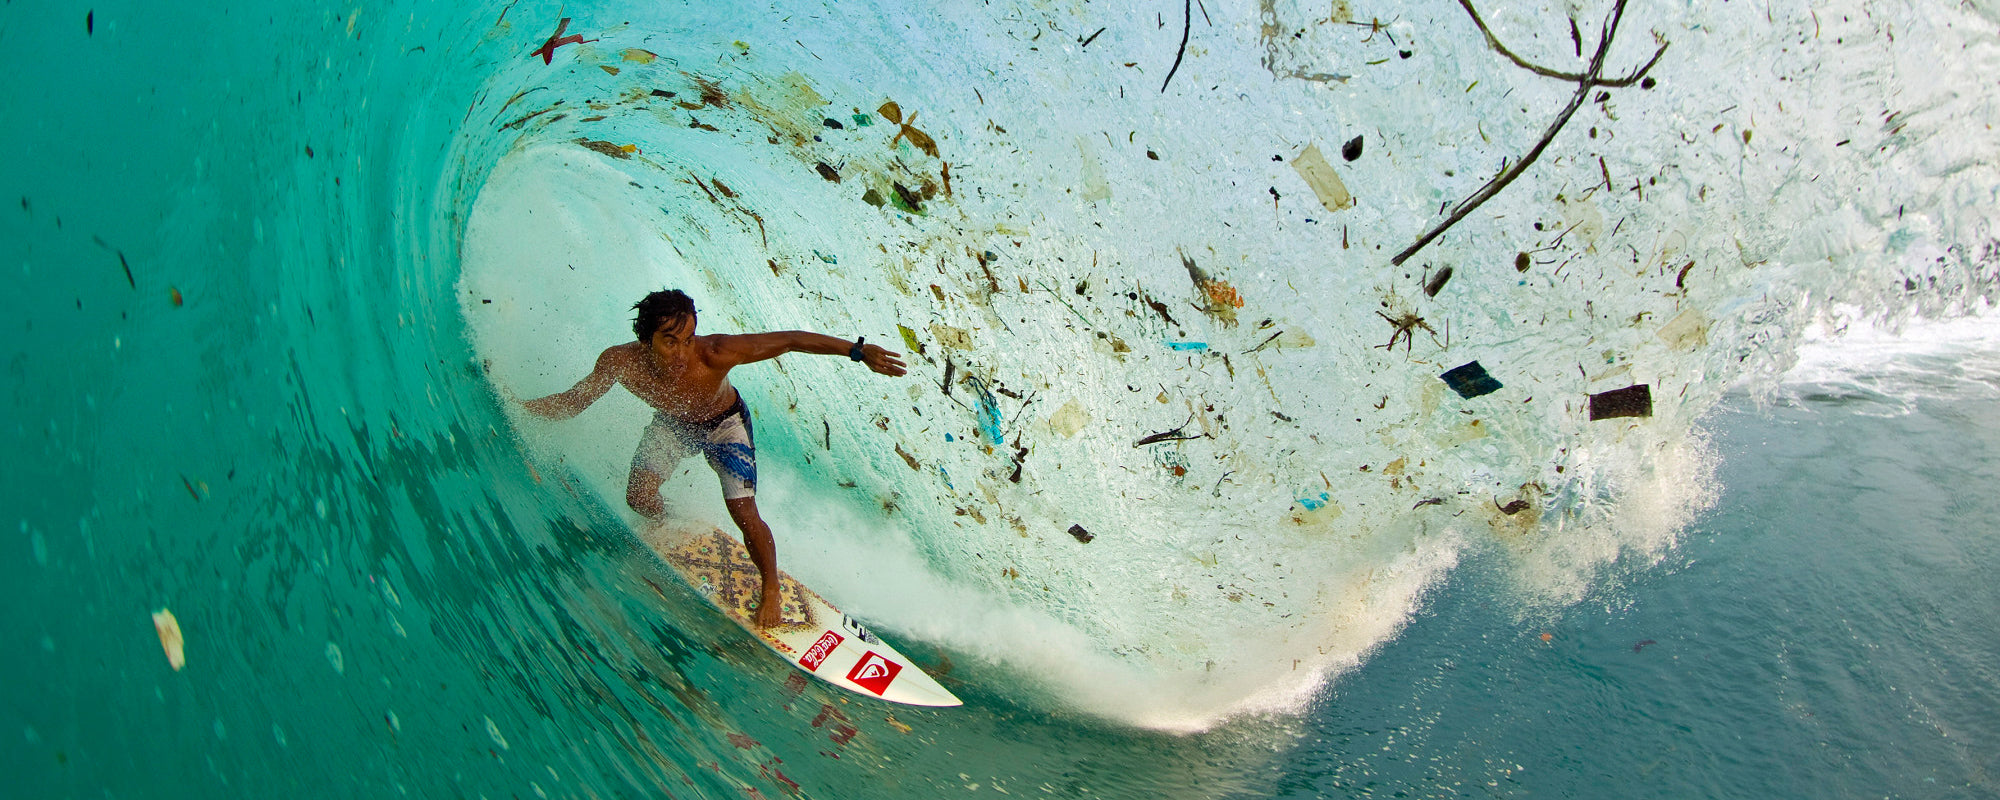 Surfer surrounded by plastic in Bali - Zak Noyle